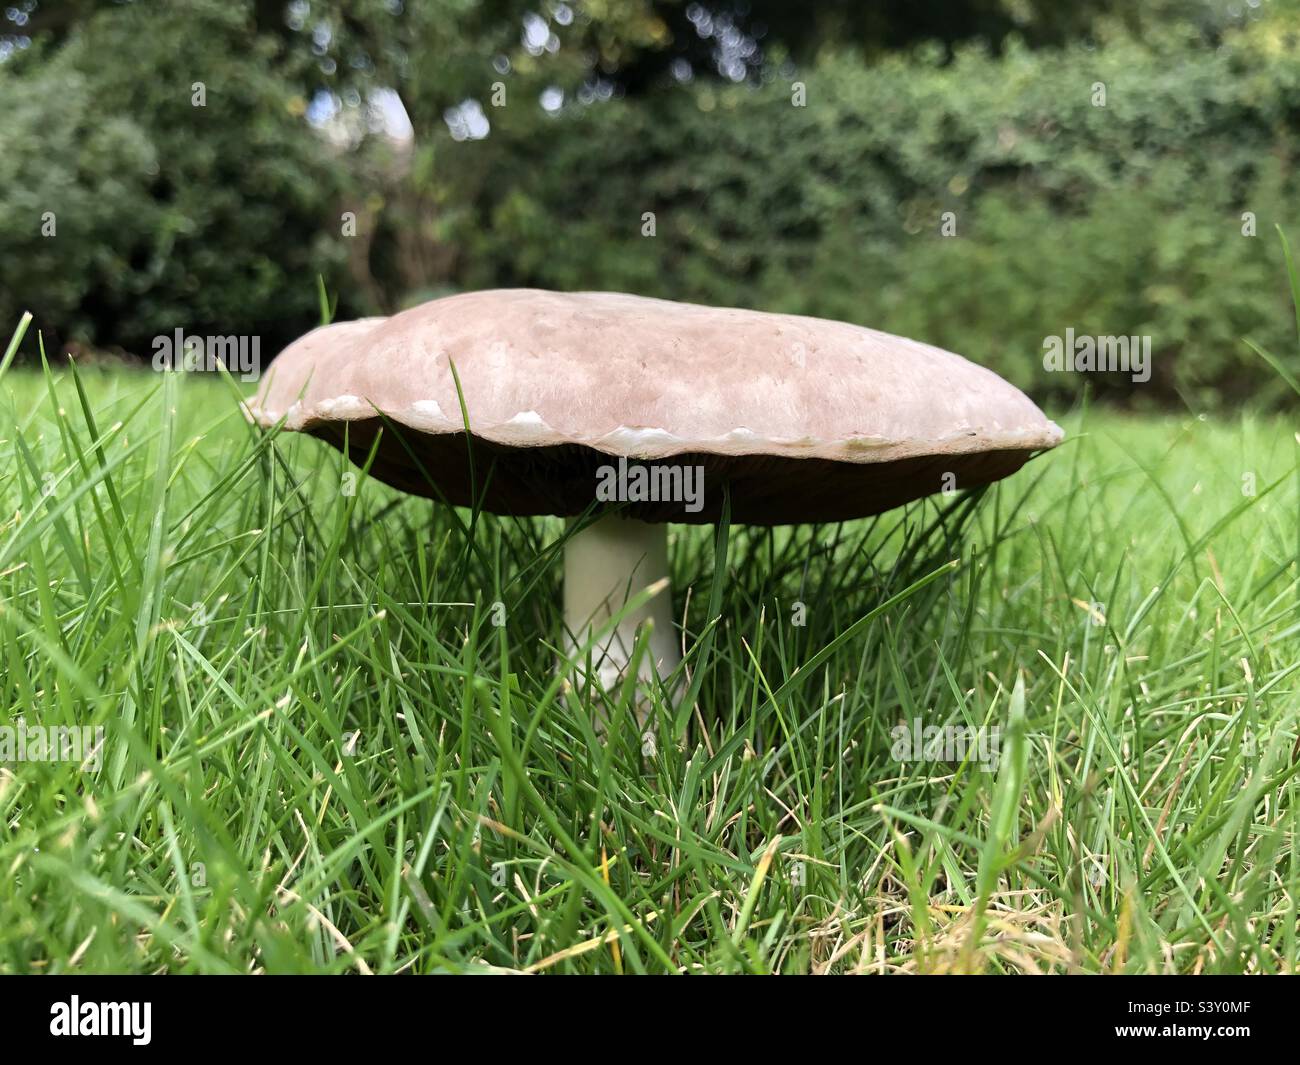 A mushroom growing in a lawn in October, United Kingdom Stock Photo